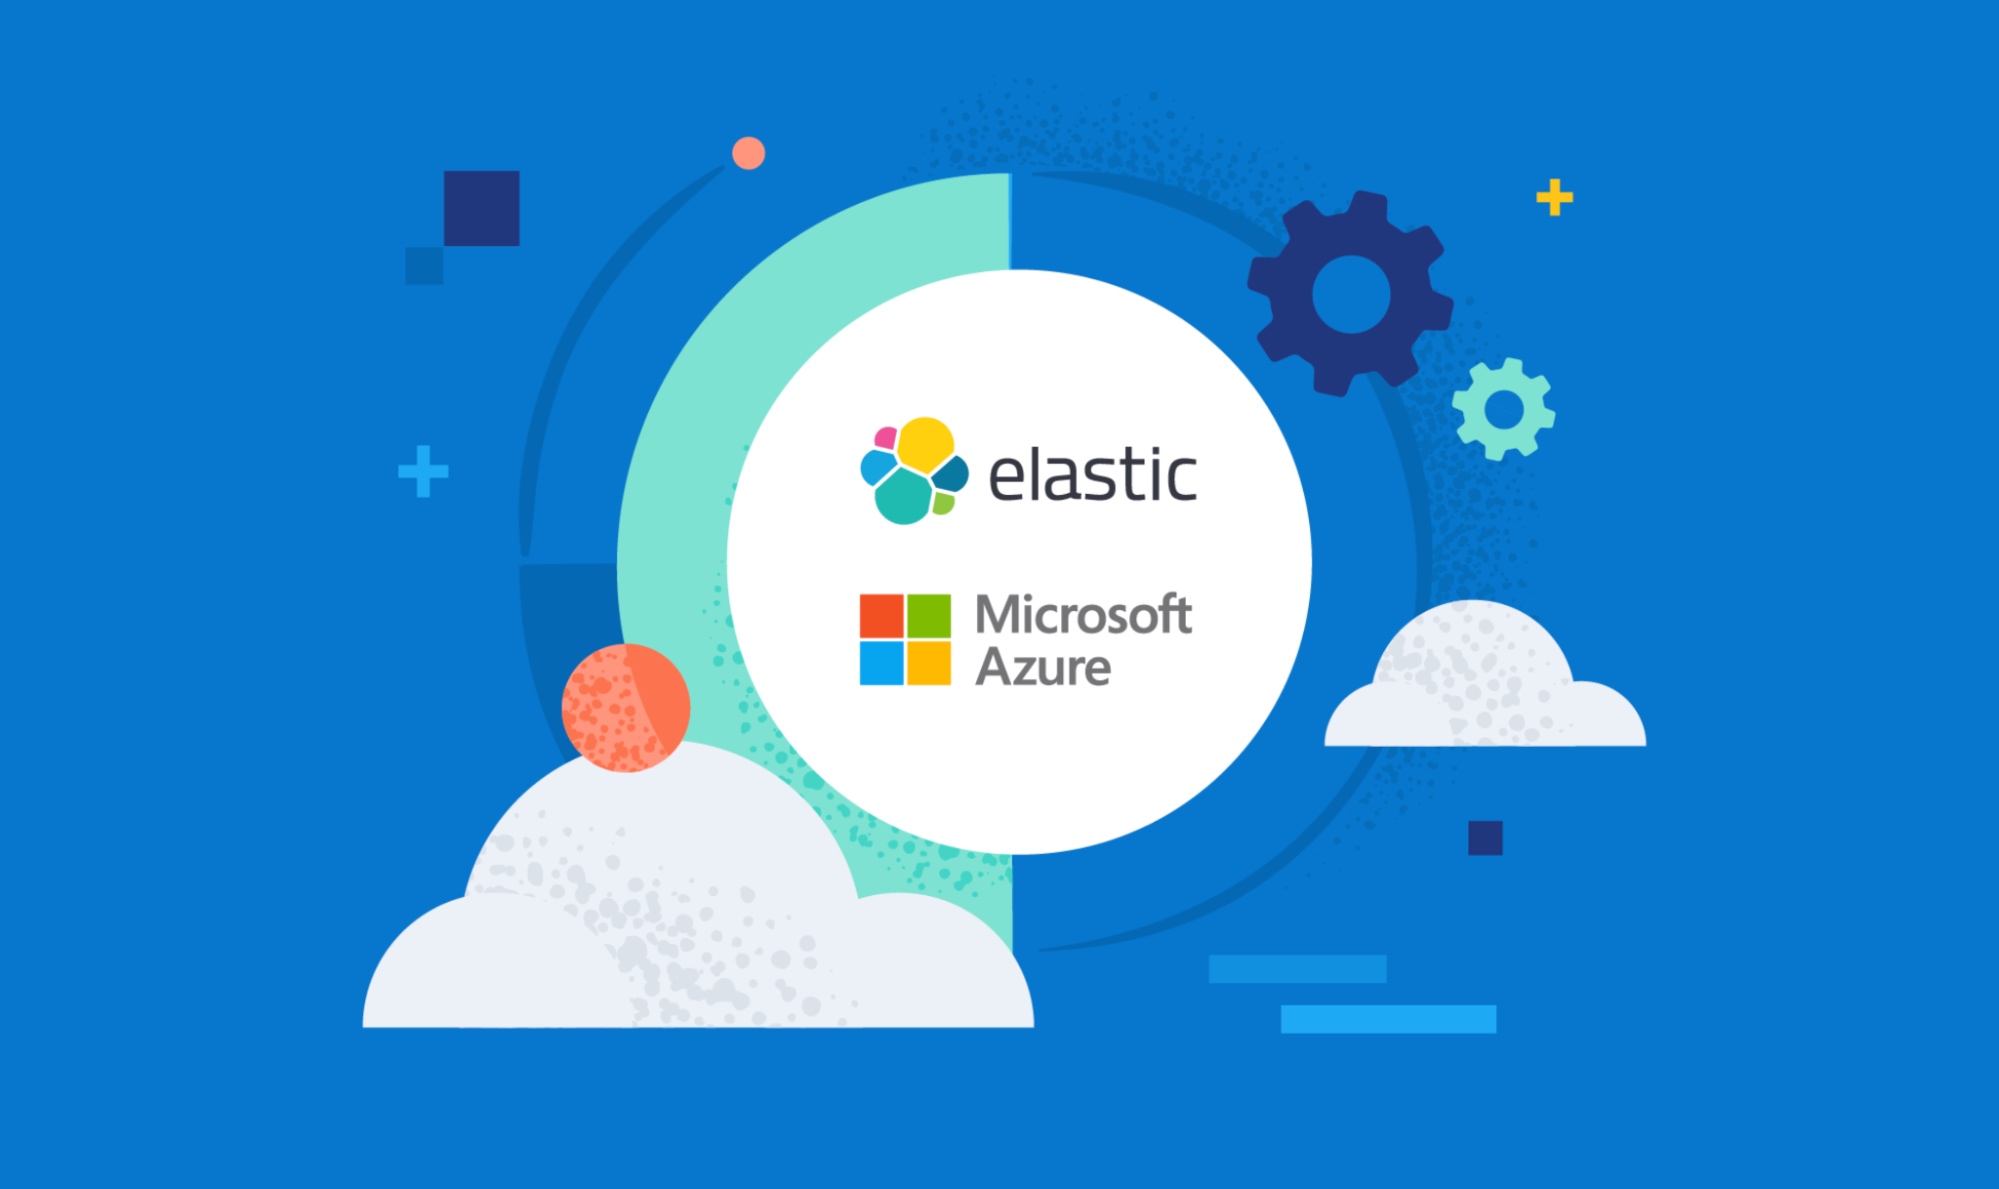 Elastic continues to innovate and grow through Microsoft partnership